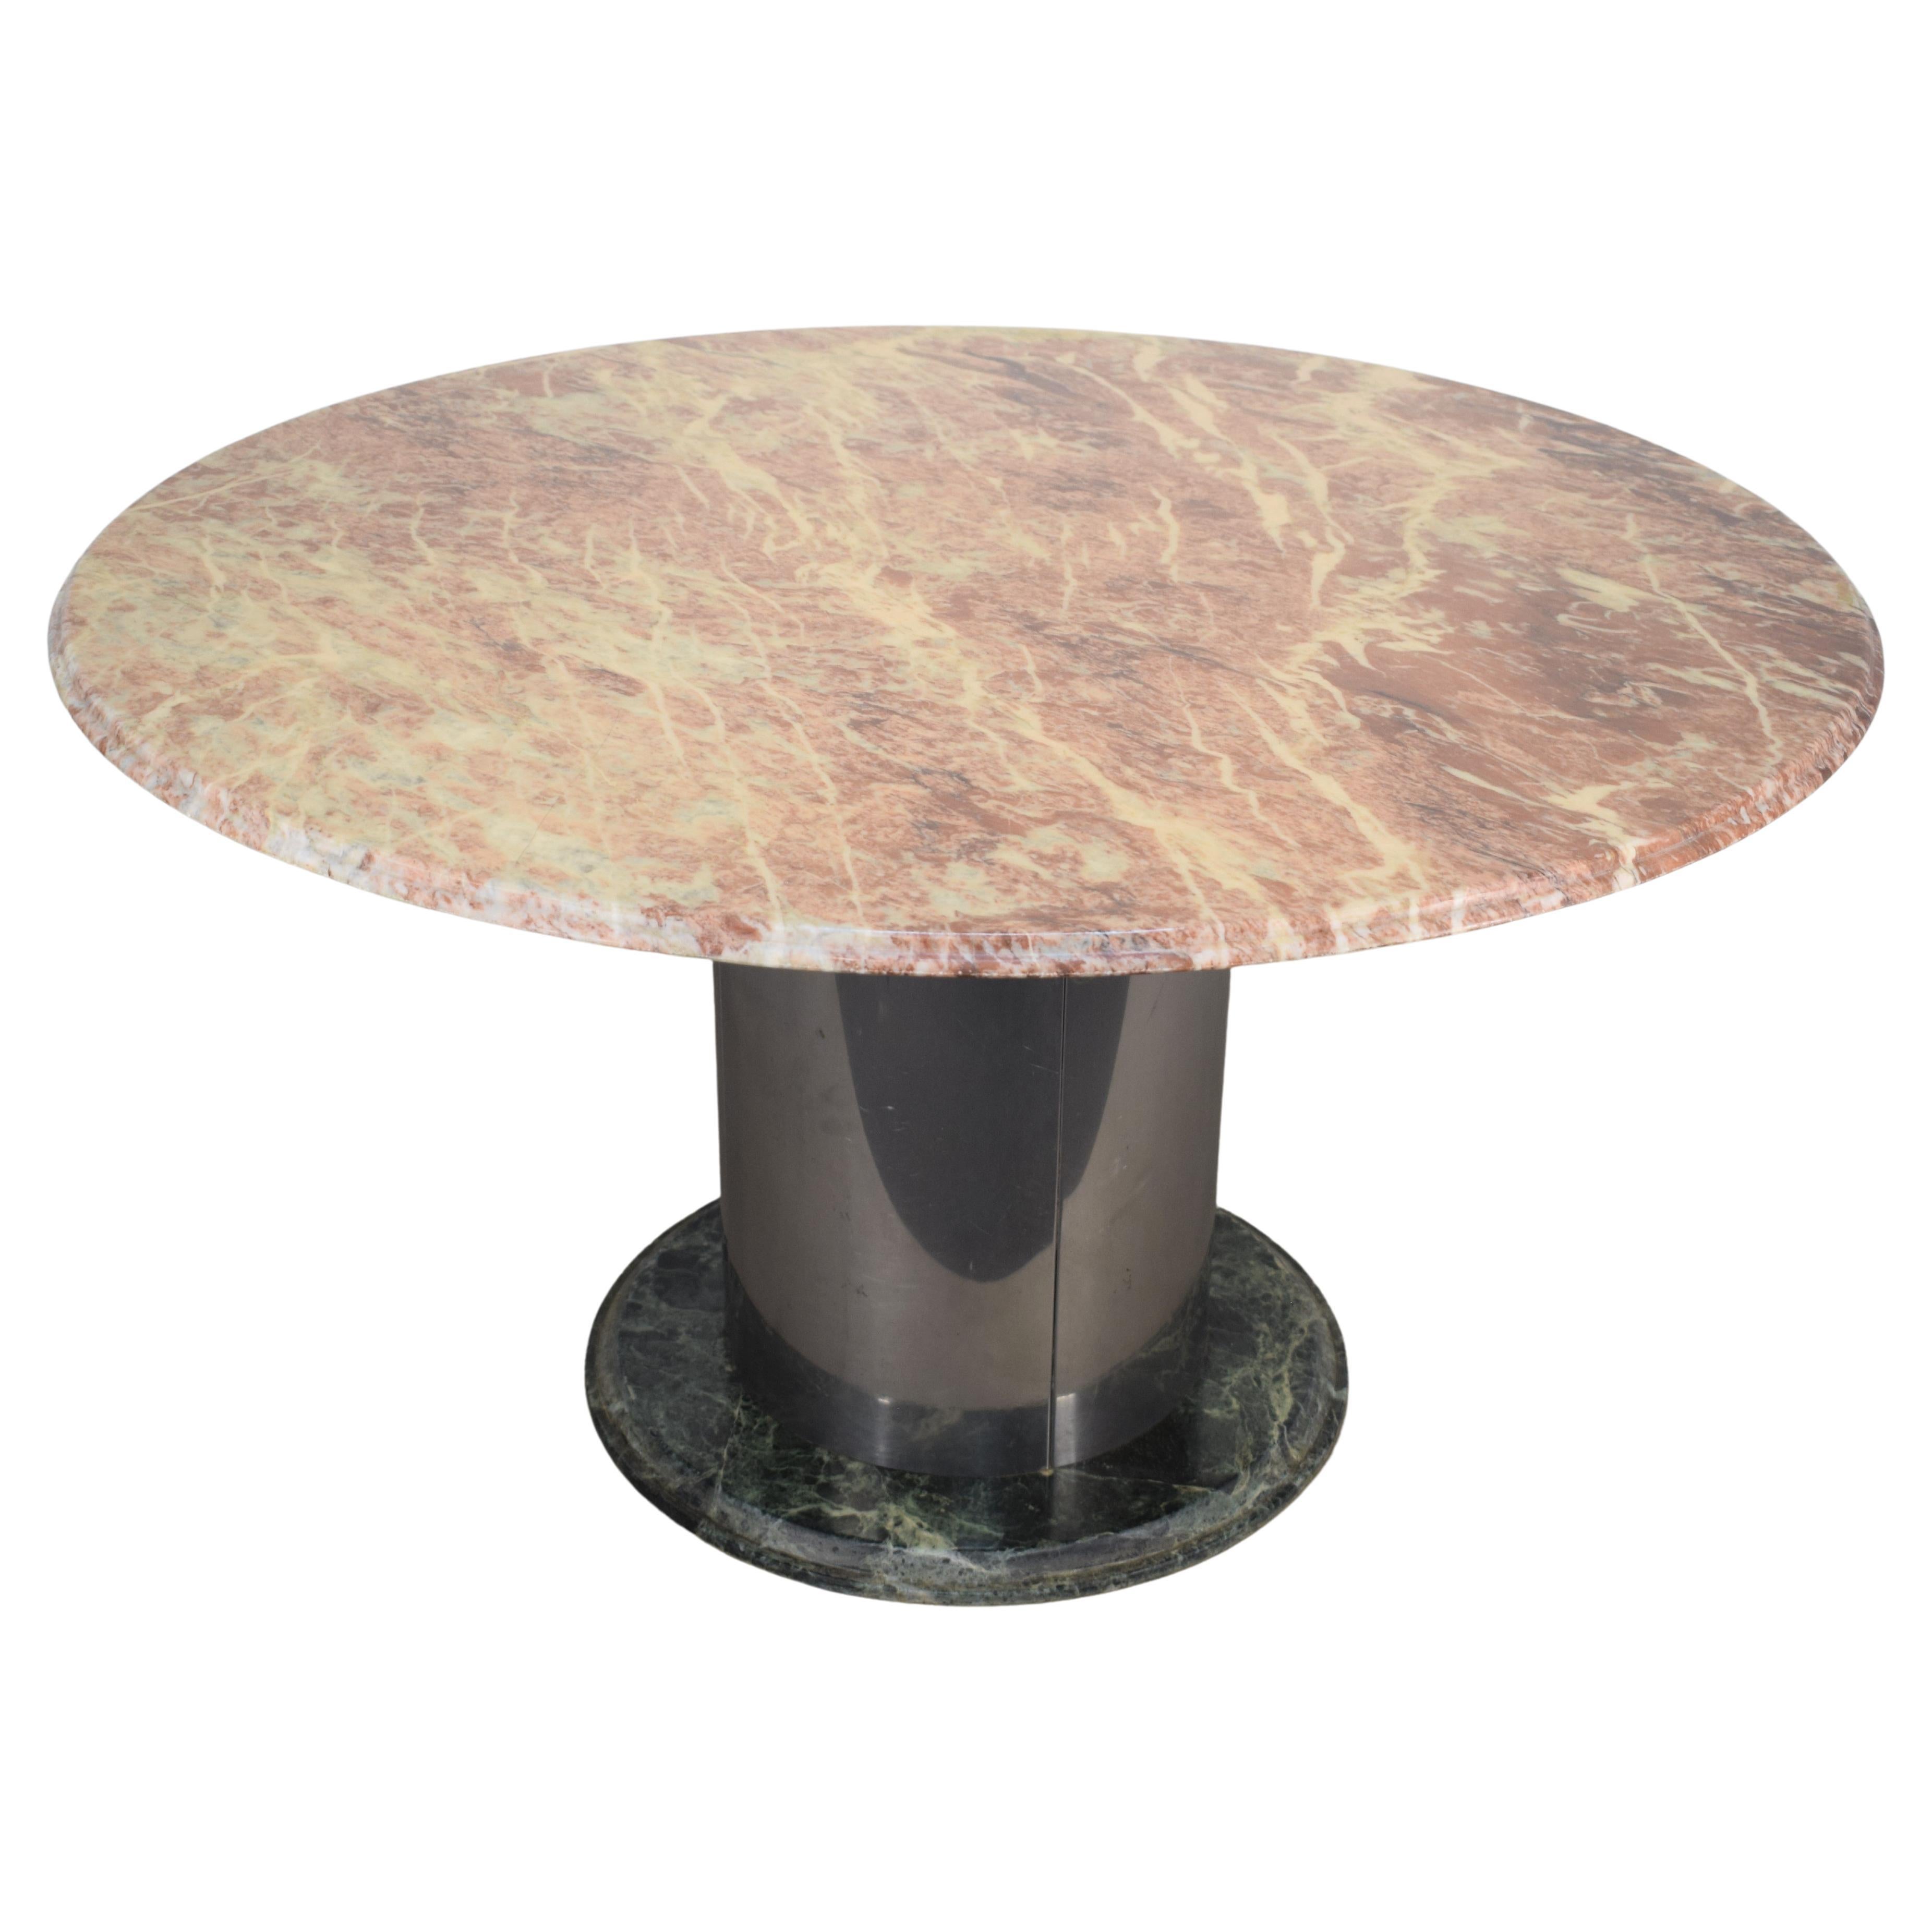 Italian Round Table, Marble and Steel, 1970s For Sale